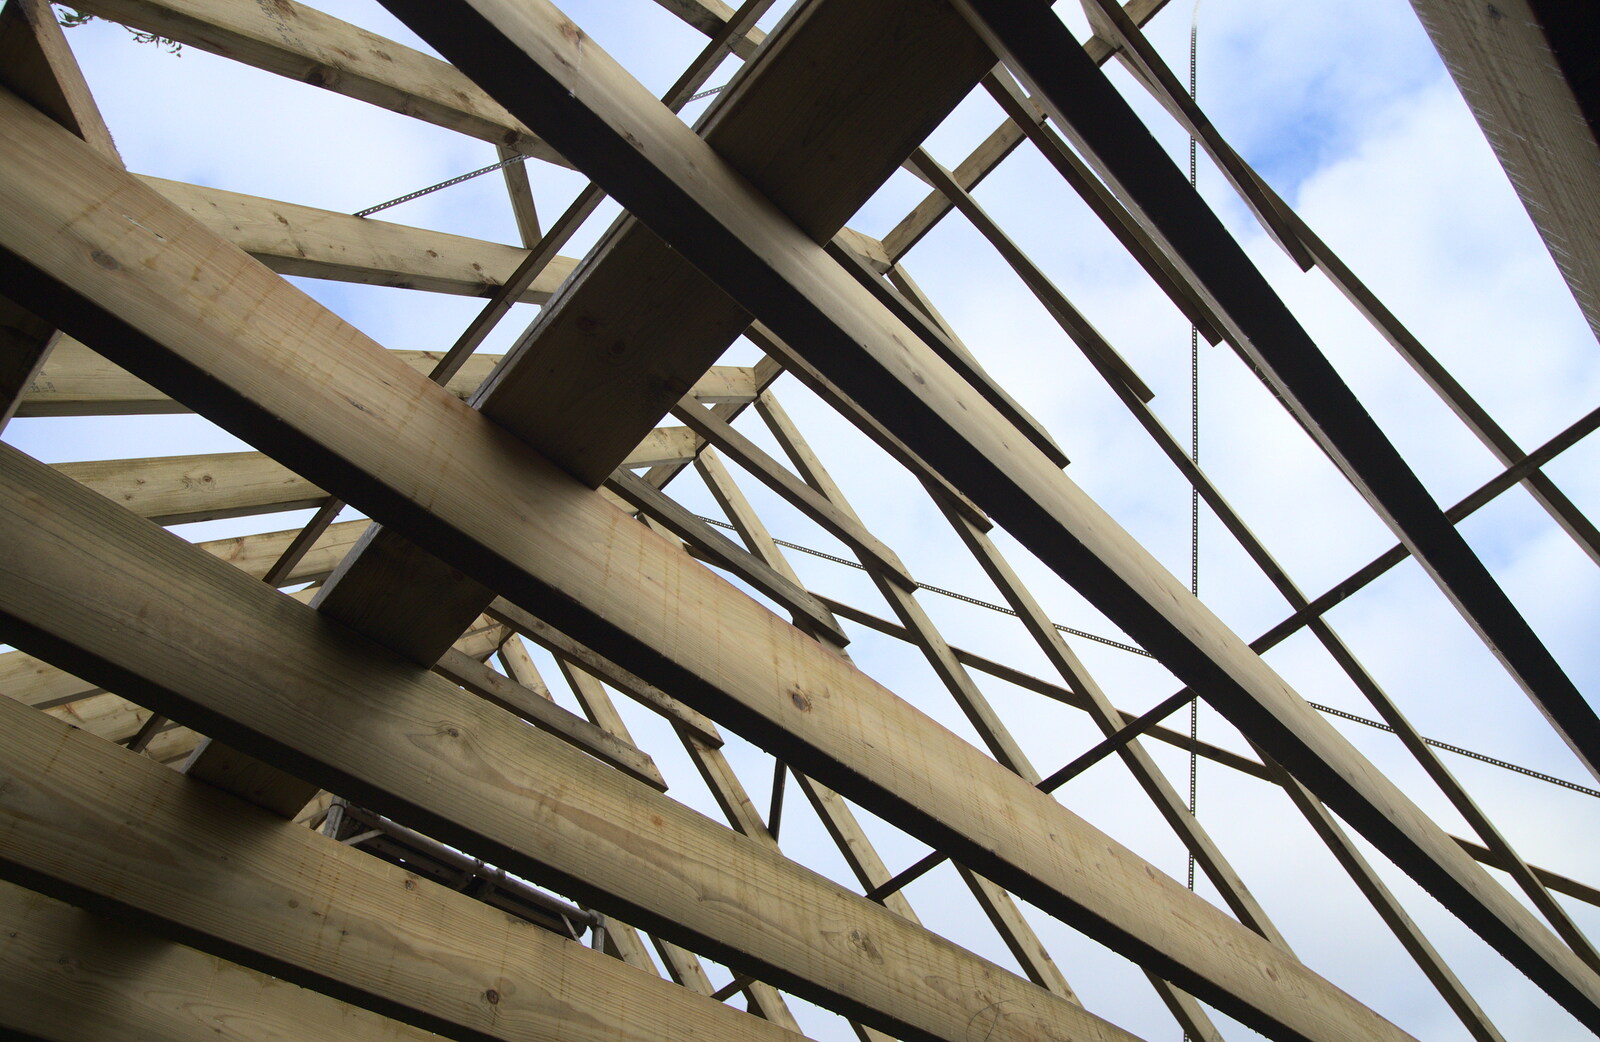 More Building and Palgrave Playground, Suffolk - 24th November 2013: The rafters of 'Brome Village Hall 2'